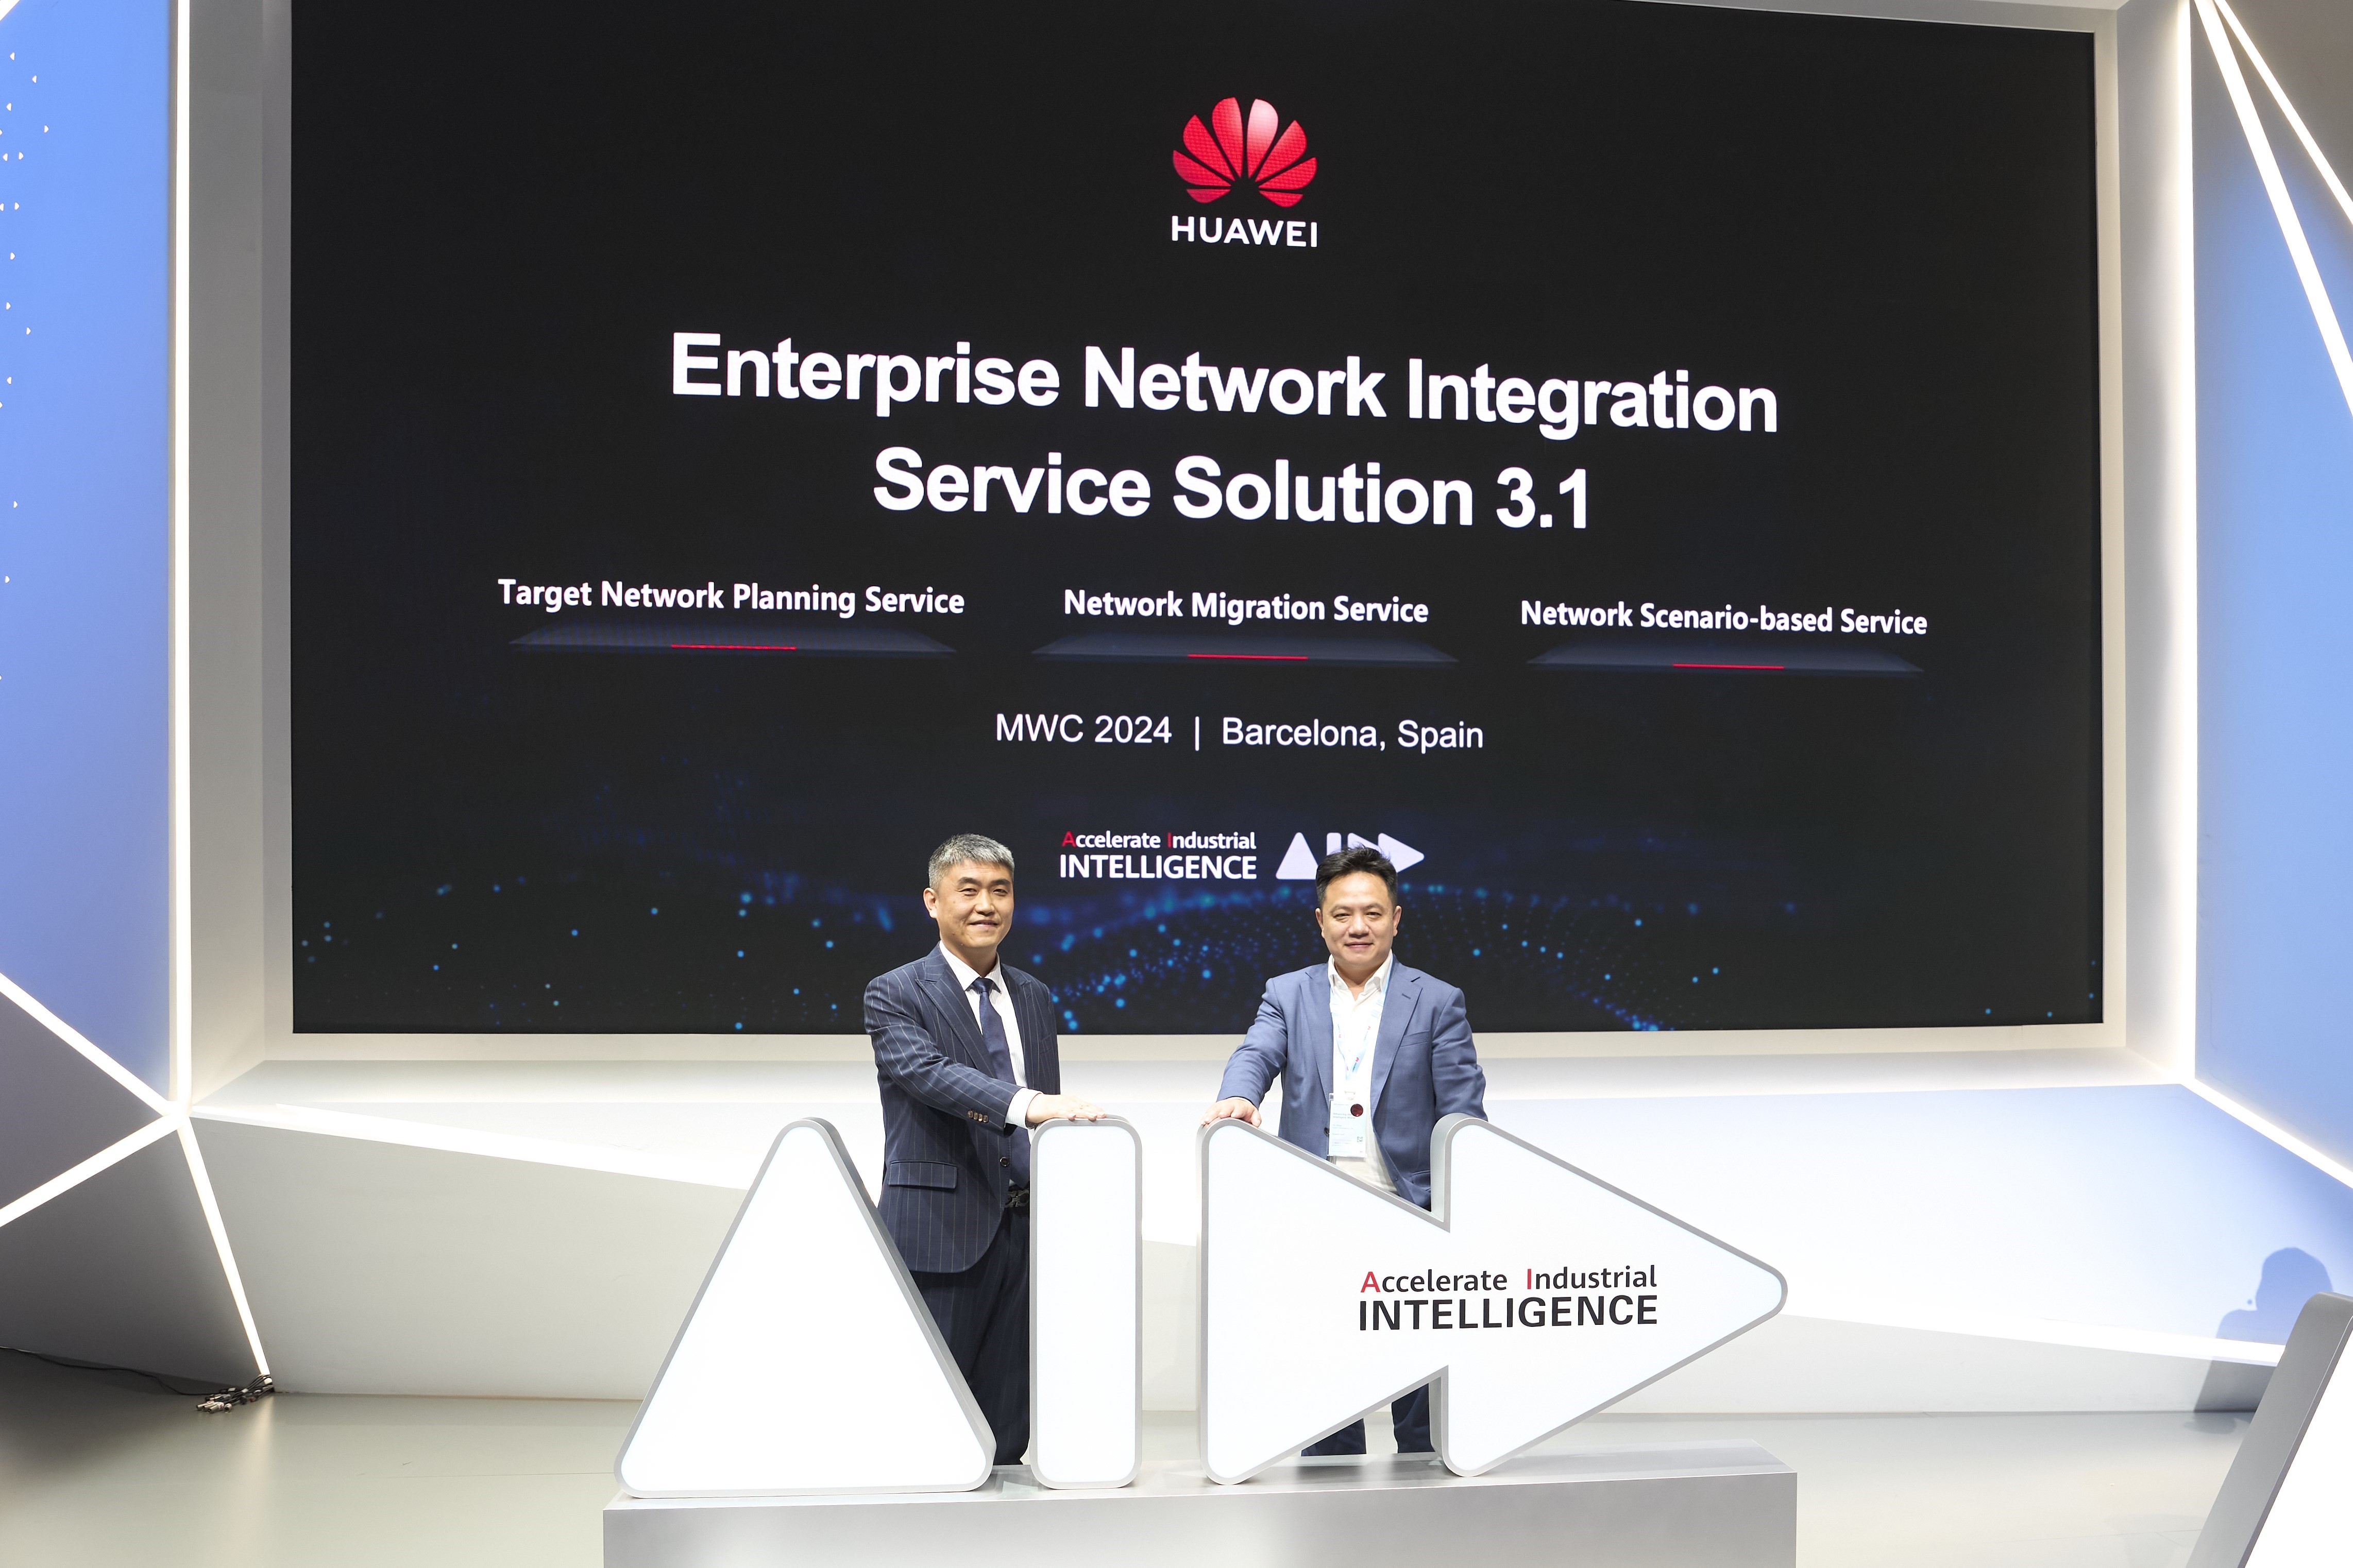 the Enterprise Network Integration Service Solution 3.1 is launched